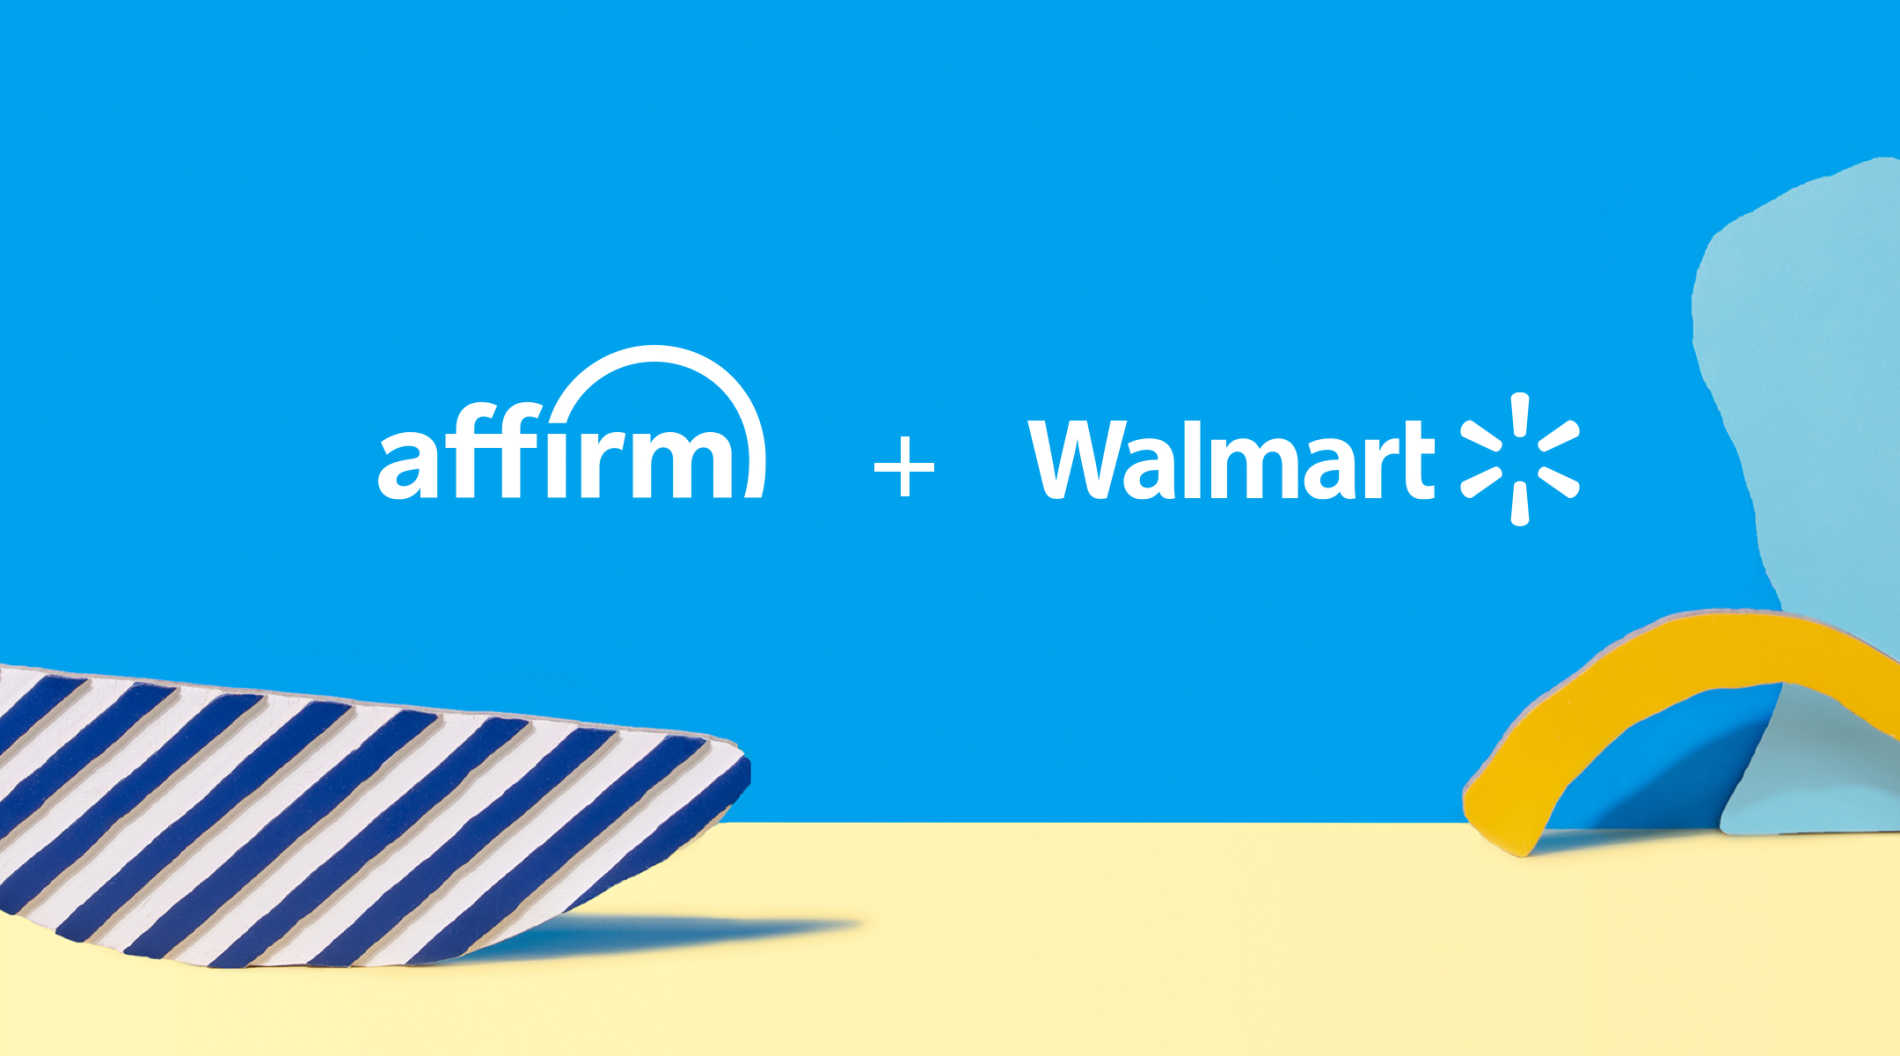 Affirm is now available at Walmart